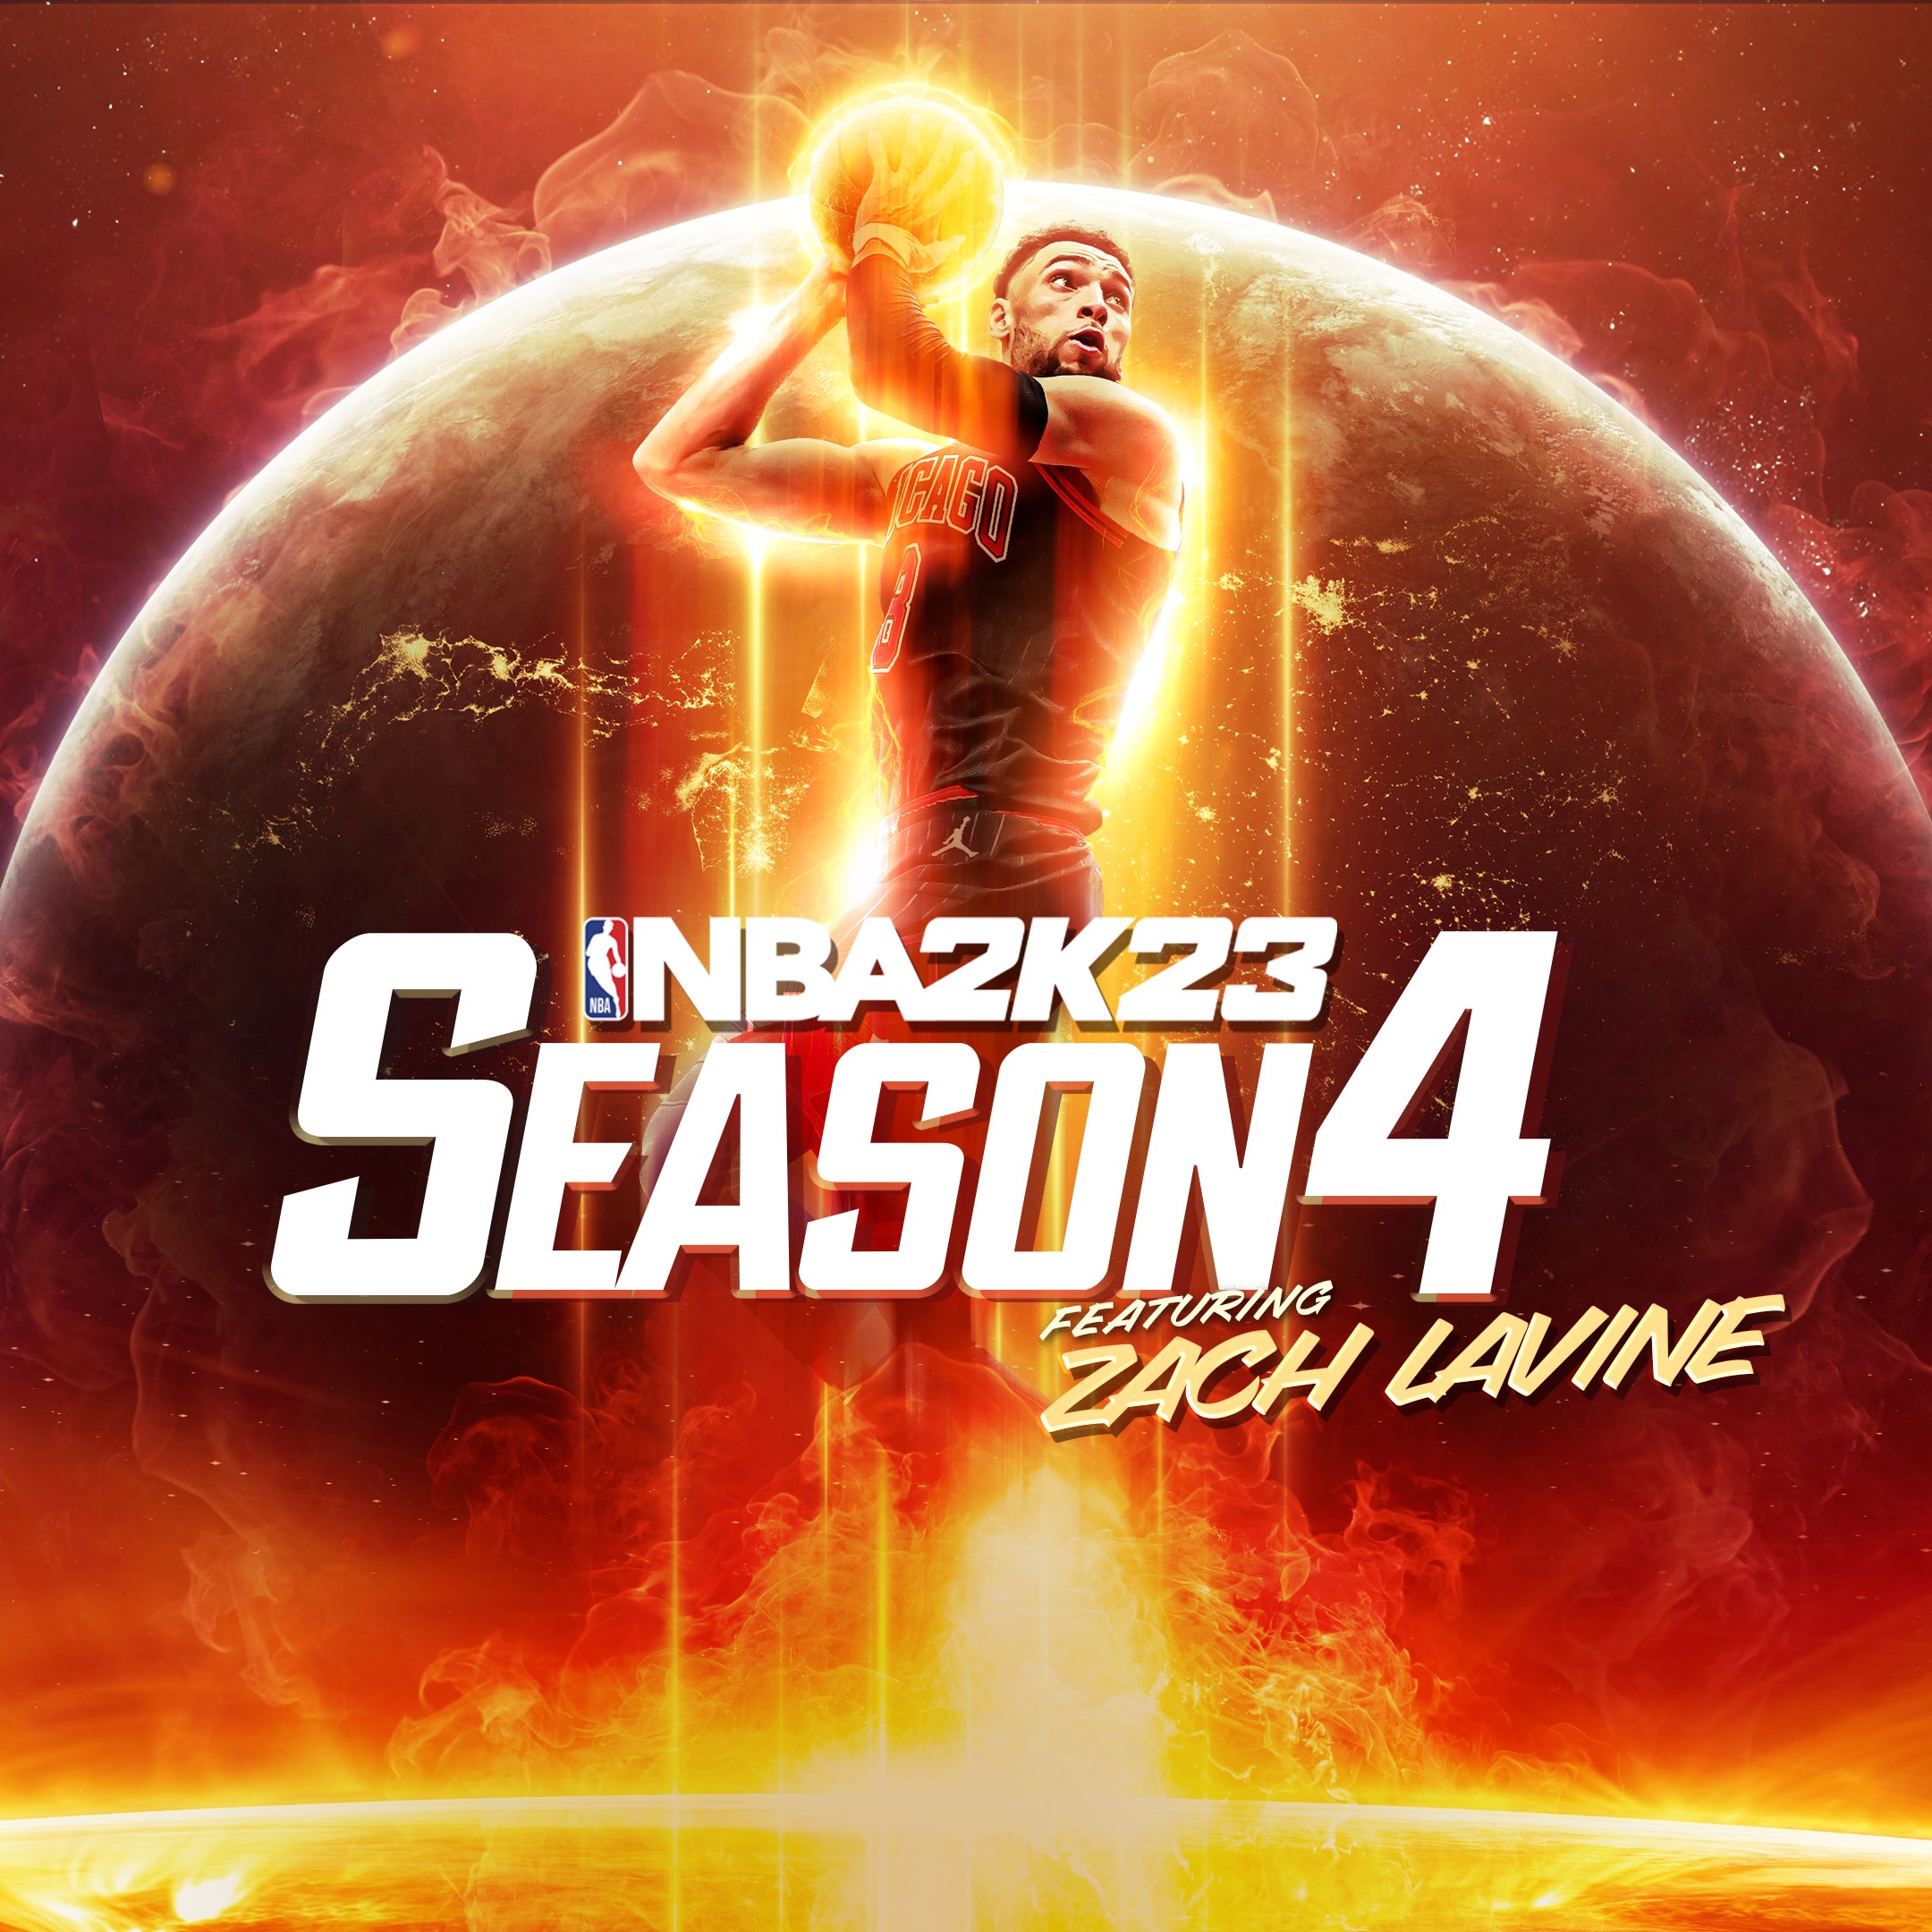 NBA 2K23 for Xbox One